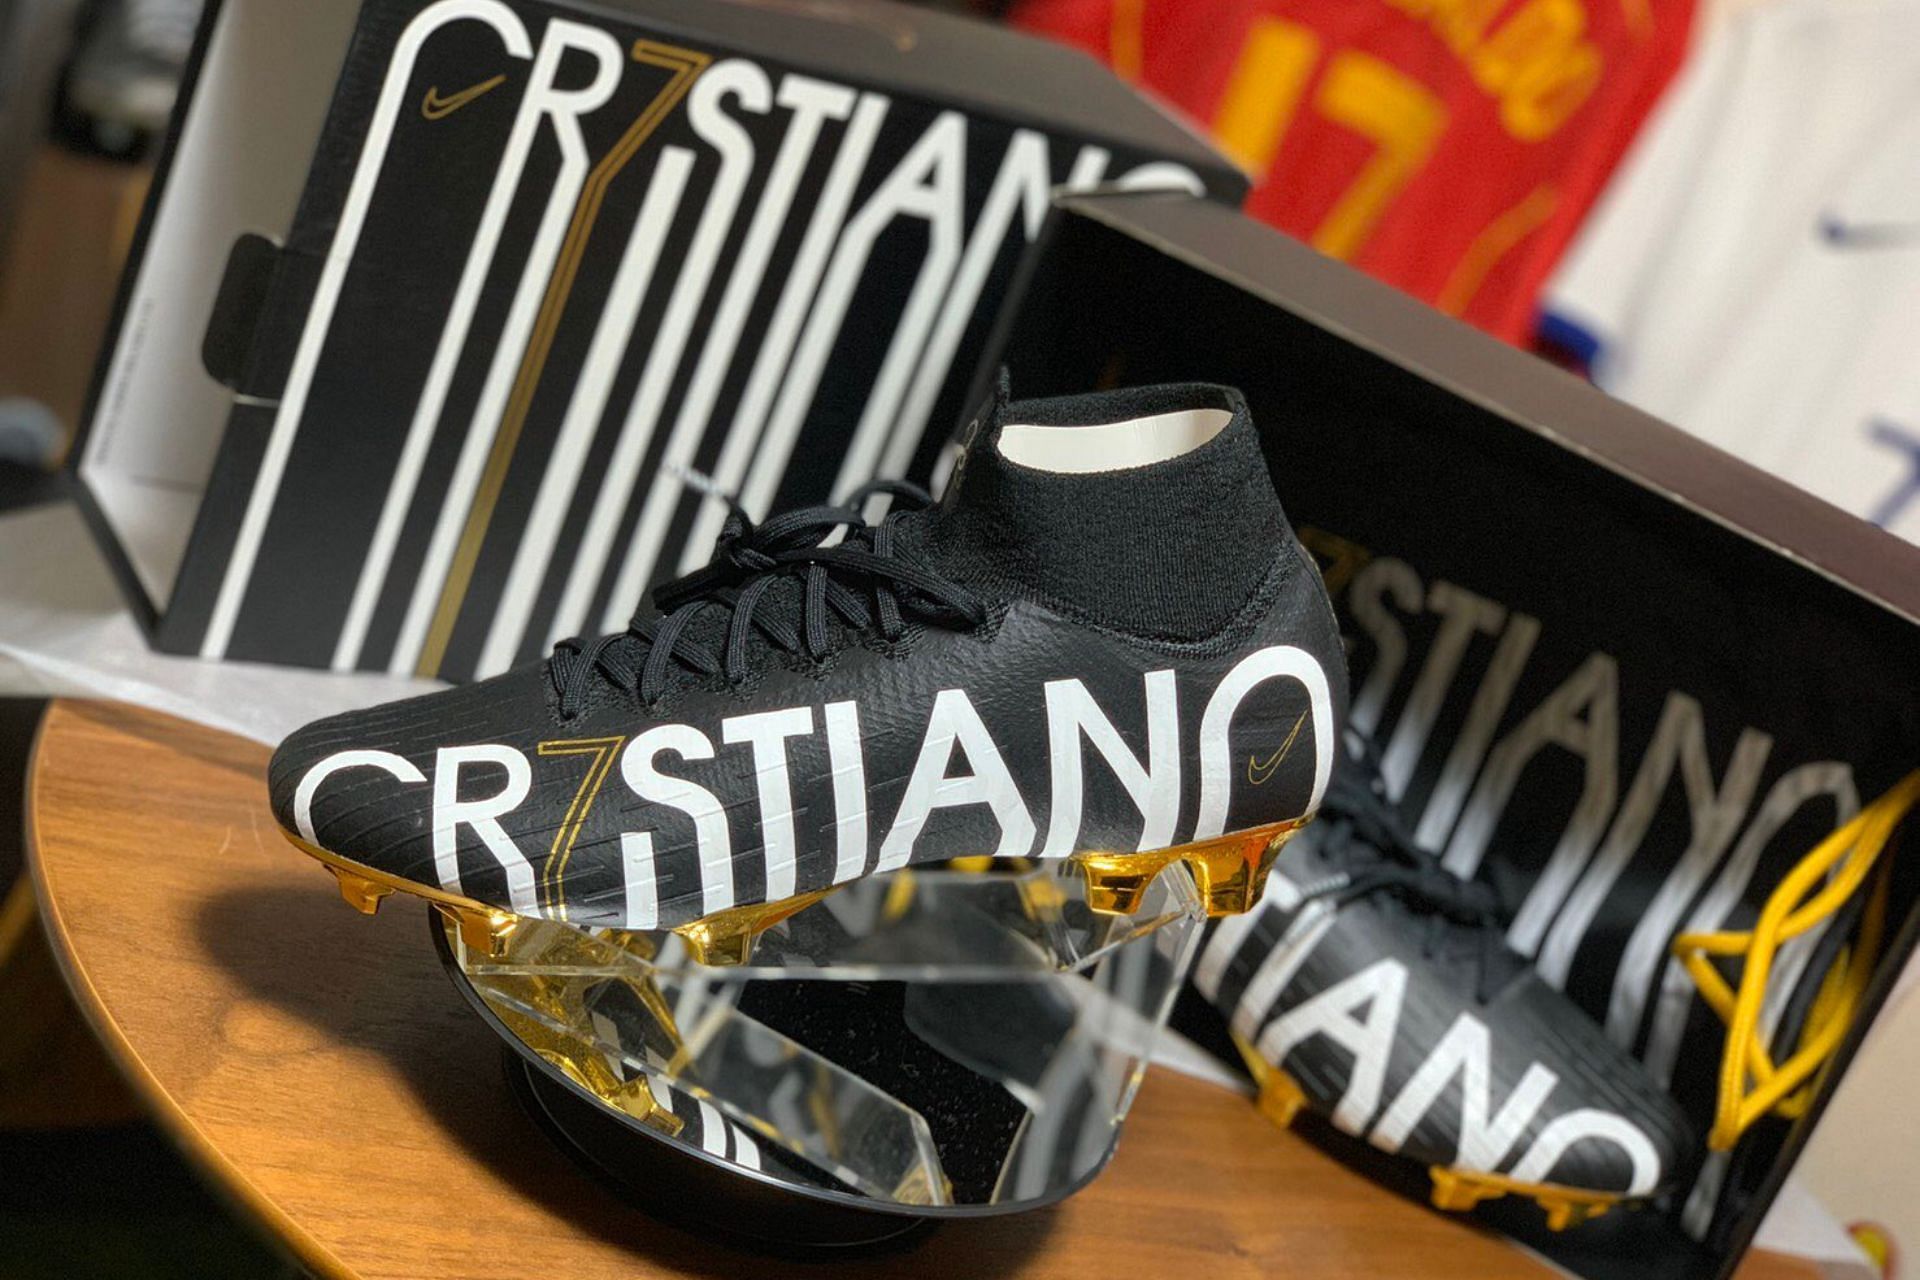 Take a closer look at the limited edition CR7STIANO colorway (Image via Twitter/@kfootball2817)